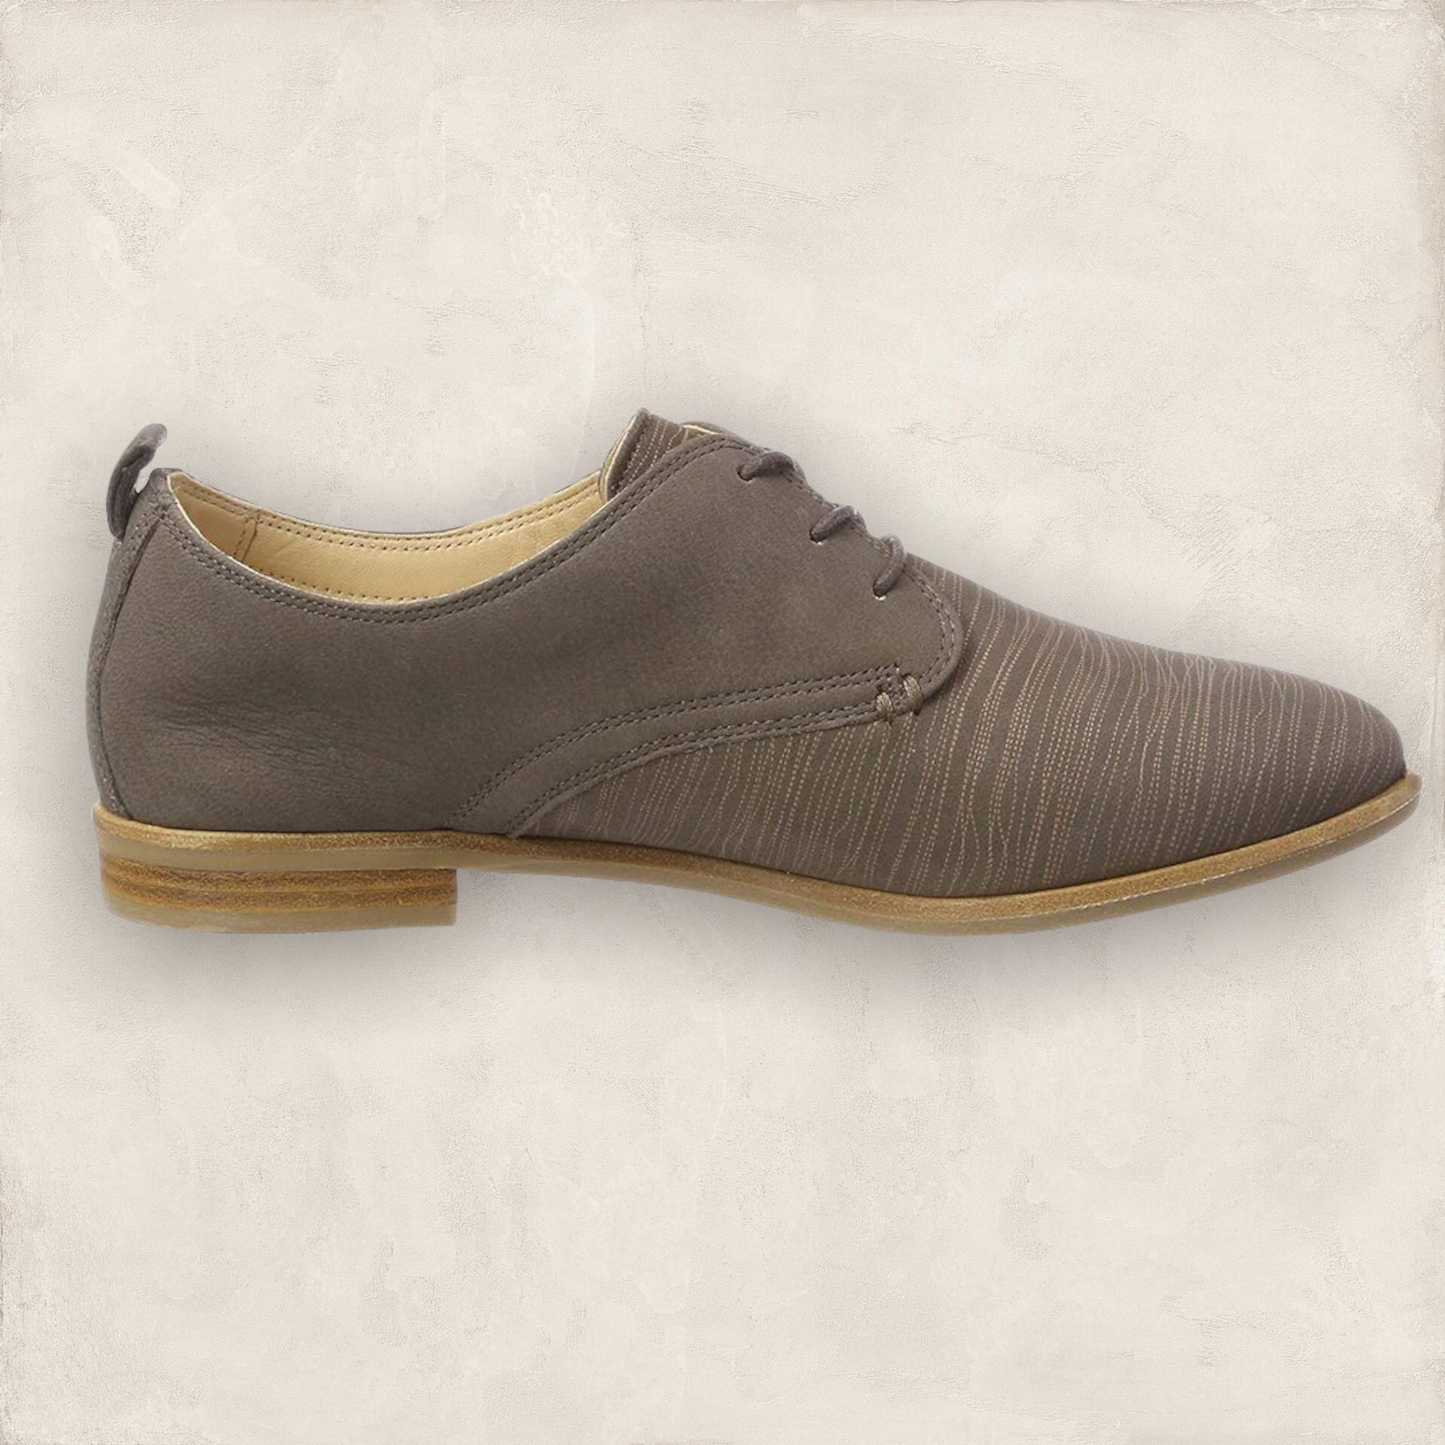 Clarks Alice May Women's Wide Lace-Up Shoes Taupe UK 5 Timeless Fashions